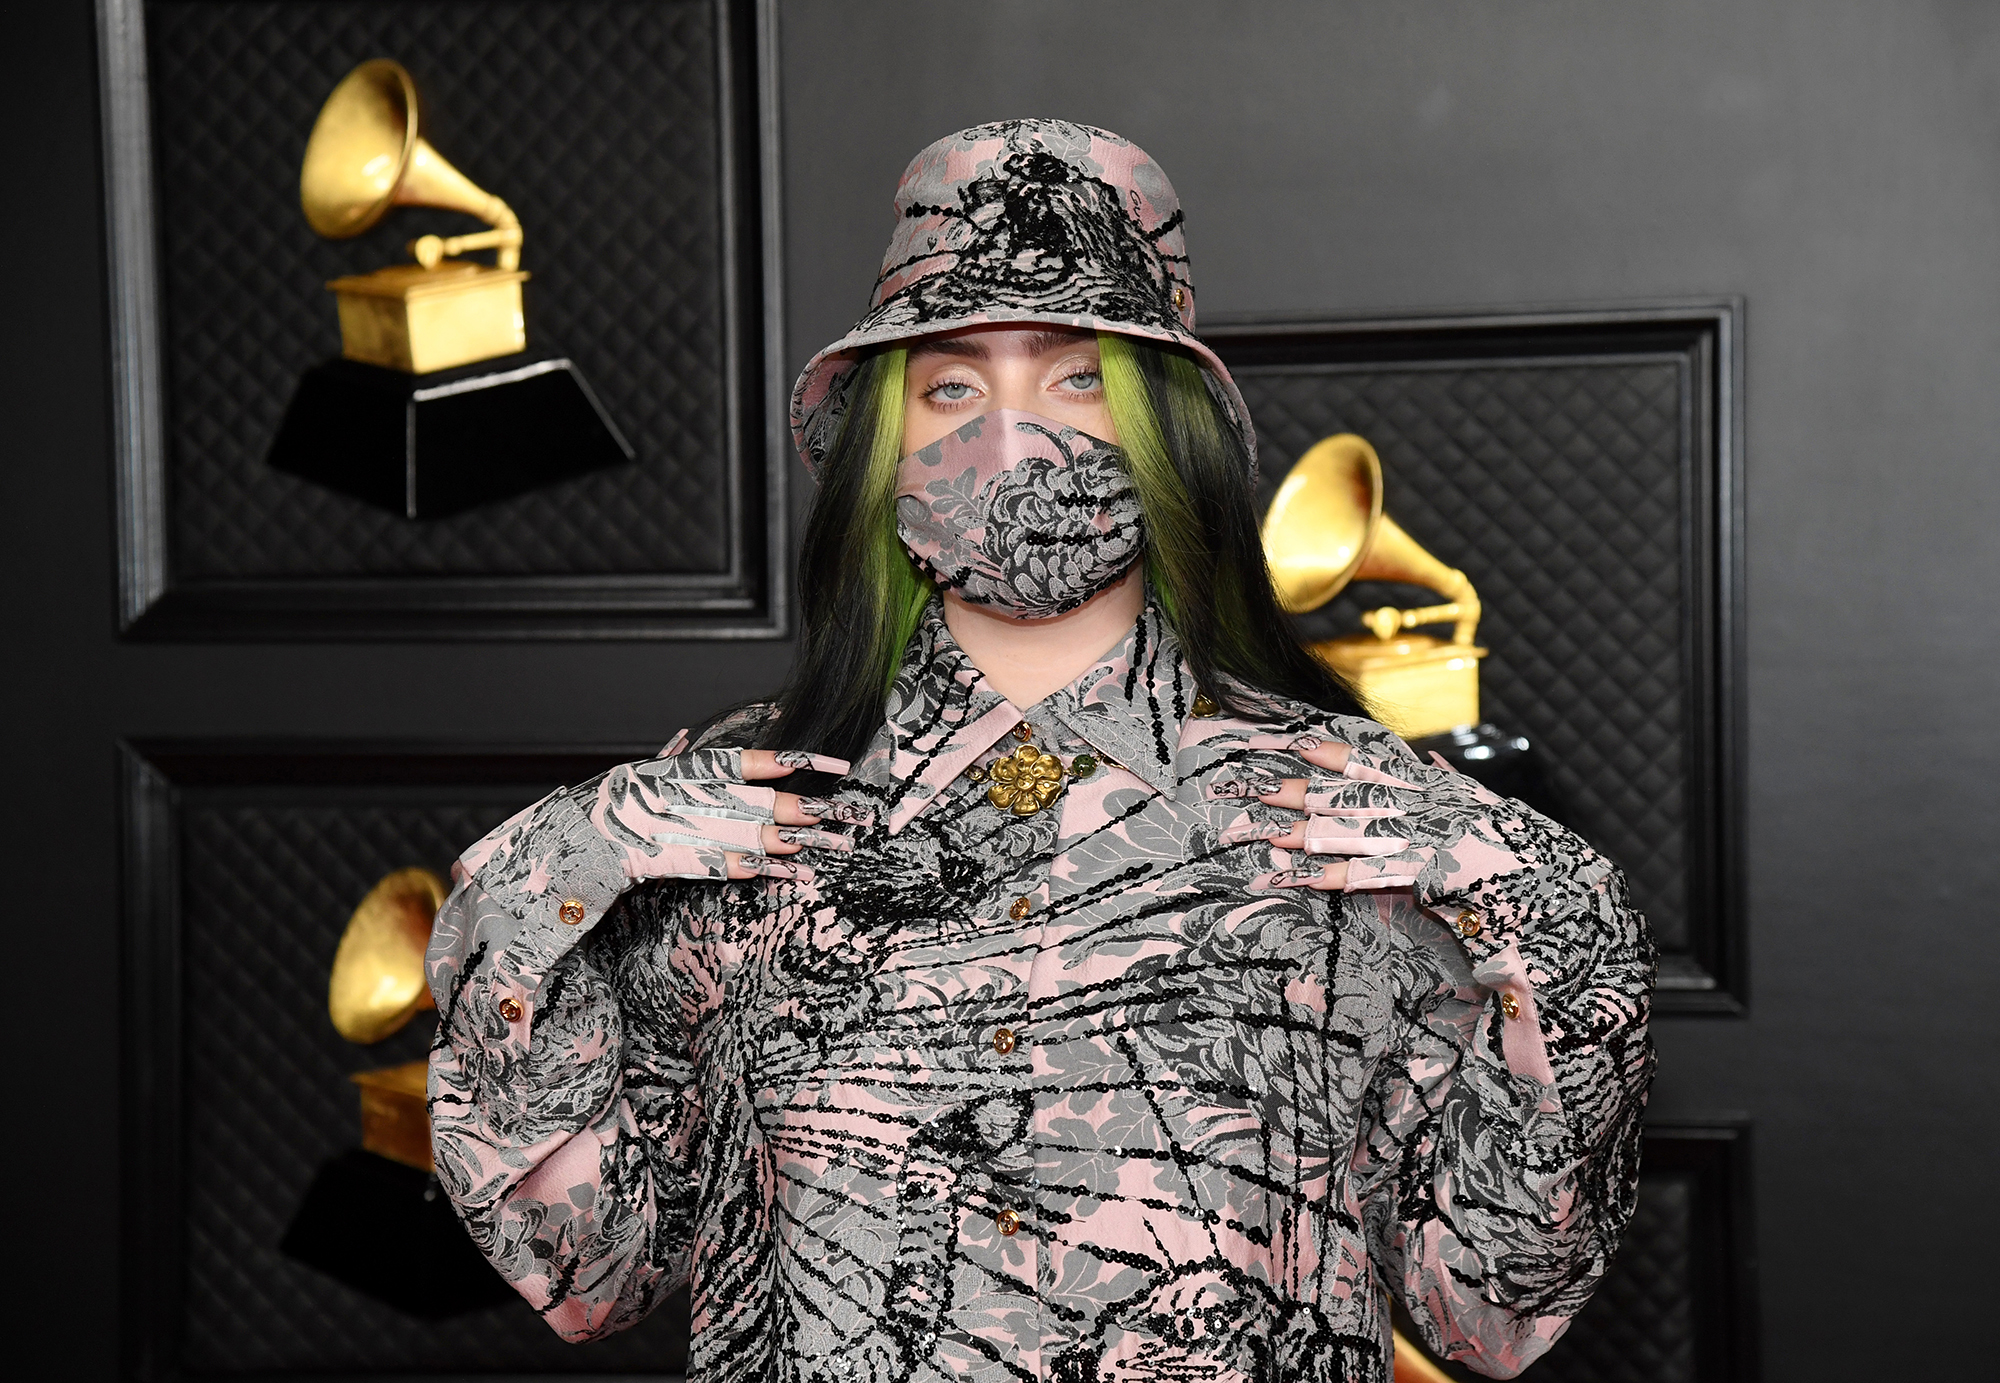 Billie Eilish poses with her hands on her shoulders at the 63rd Annual Grammy Awards in Los Angeles, California.